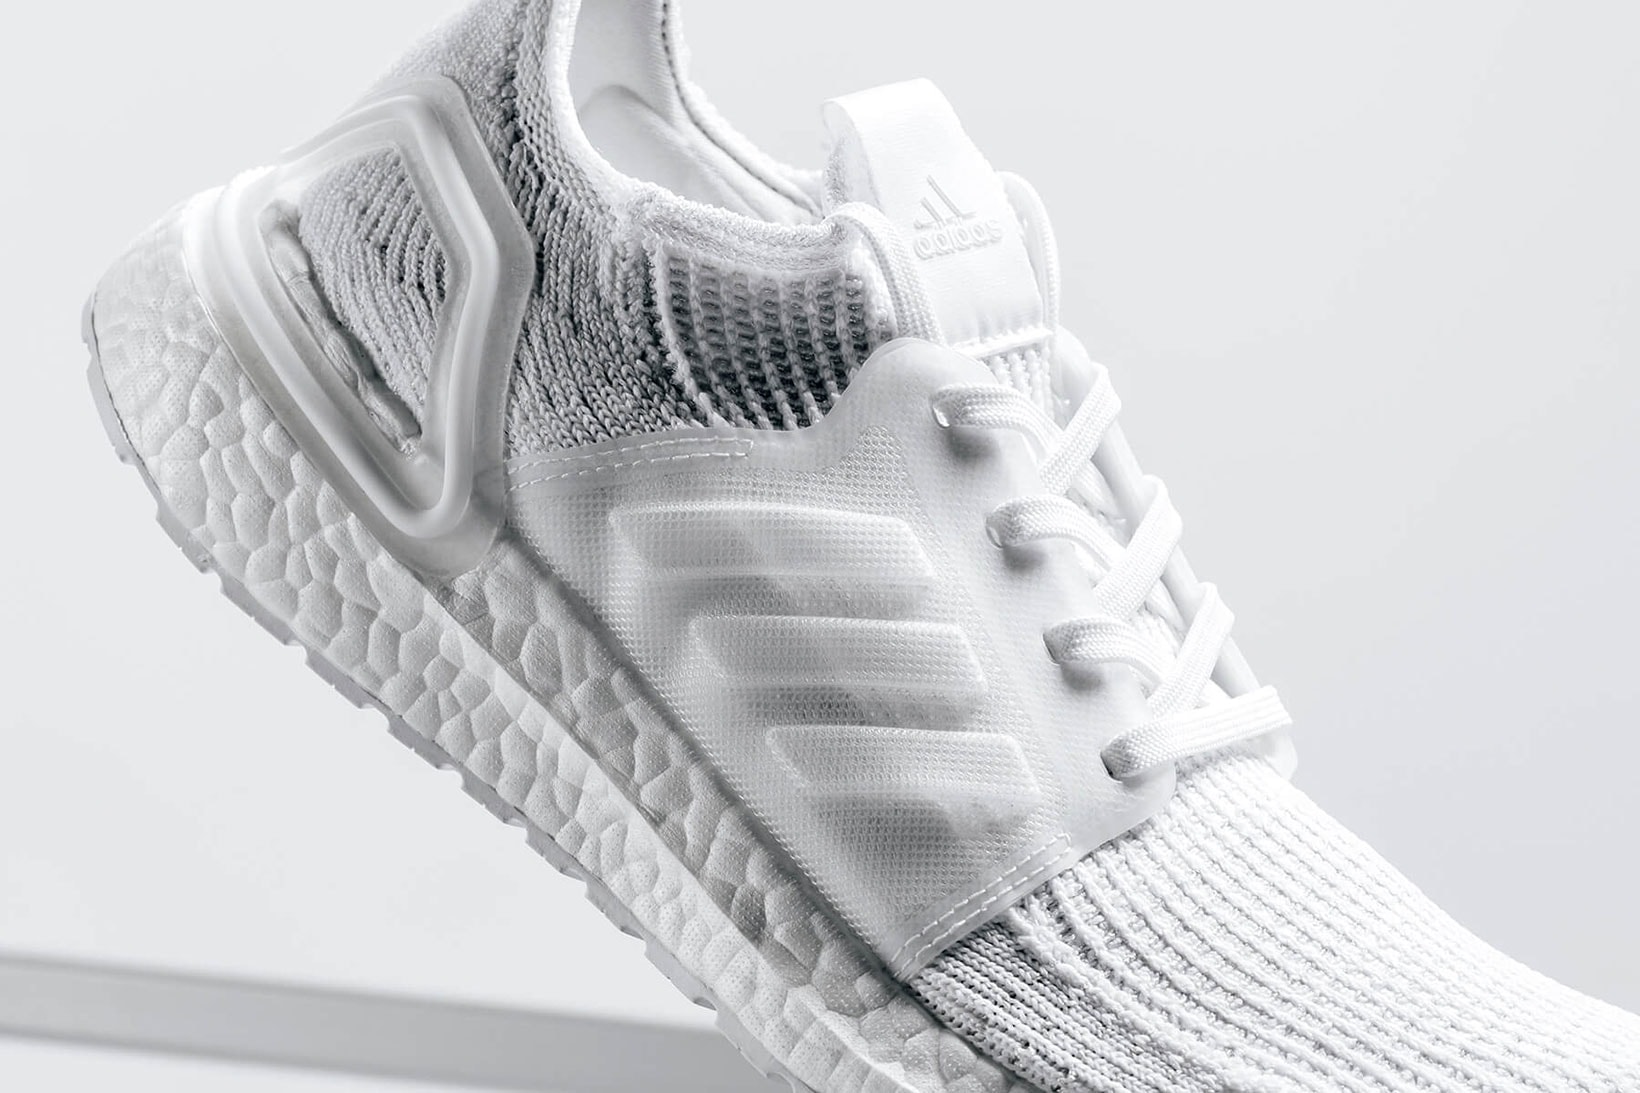 adidas' Latest UltraBOOST Arrives in All White | Hypebae